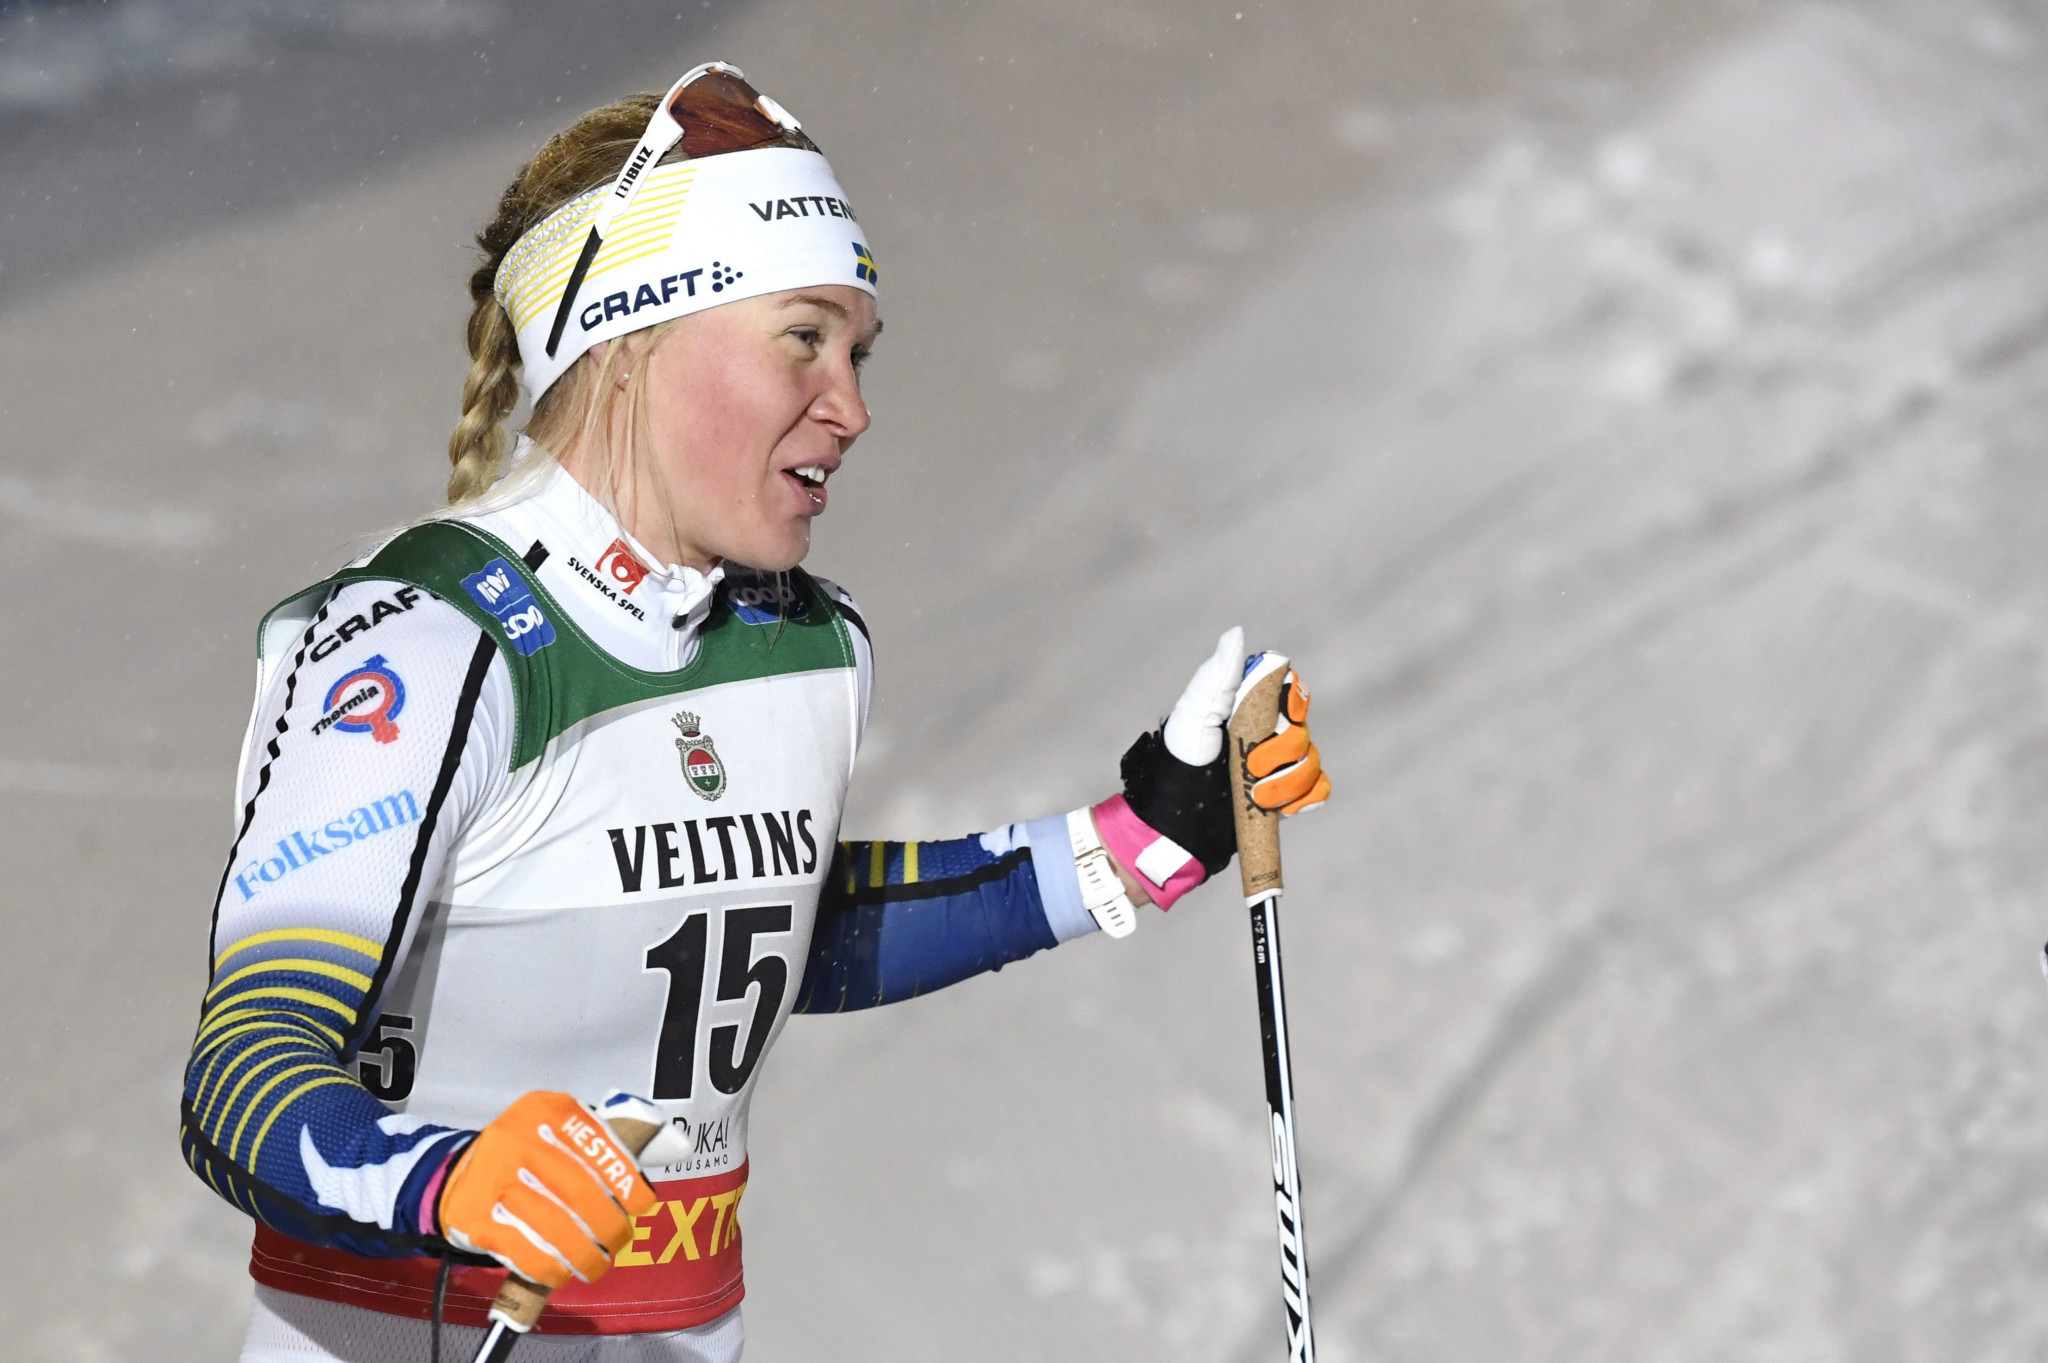 Sweden's Sundling misses out on FIS Cross-Country World Cup event in Dresden with cold